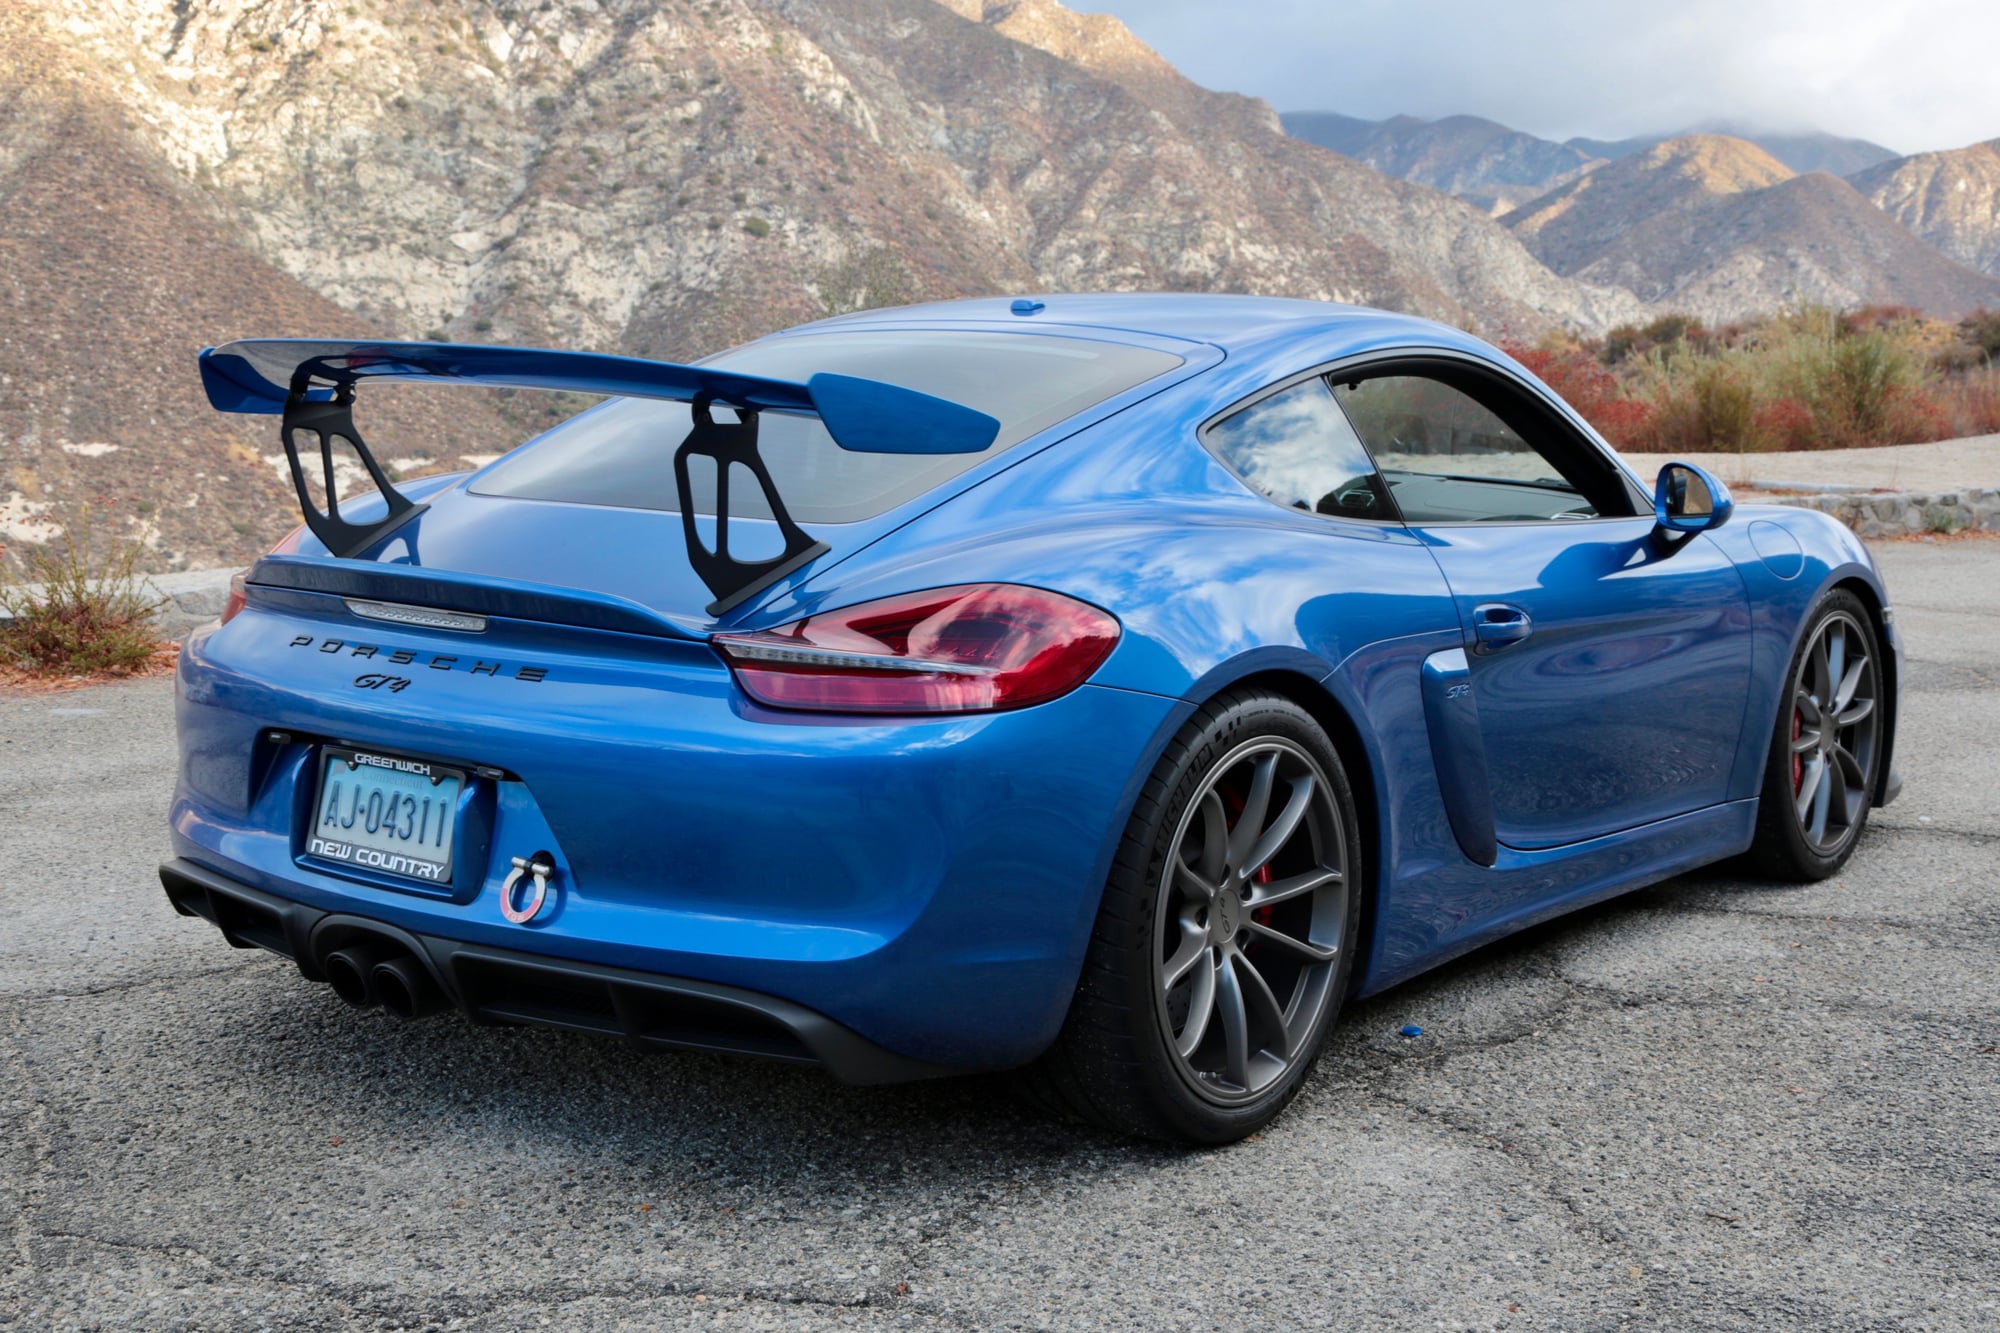 2016 Porsche Cayman GT4 - 2016 Cayman GT4 Sapphire Blue, LWB, Track Modifications - Used - VIN WP0AC2A83GK191536 - 13,800 Miles - 6 cyl - 2WD - Manual - Coupe - Blue - Venice, CA 90291, United States